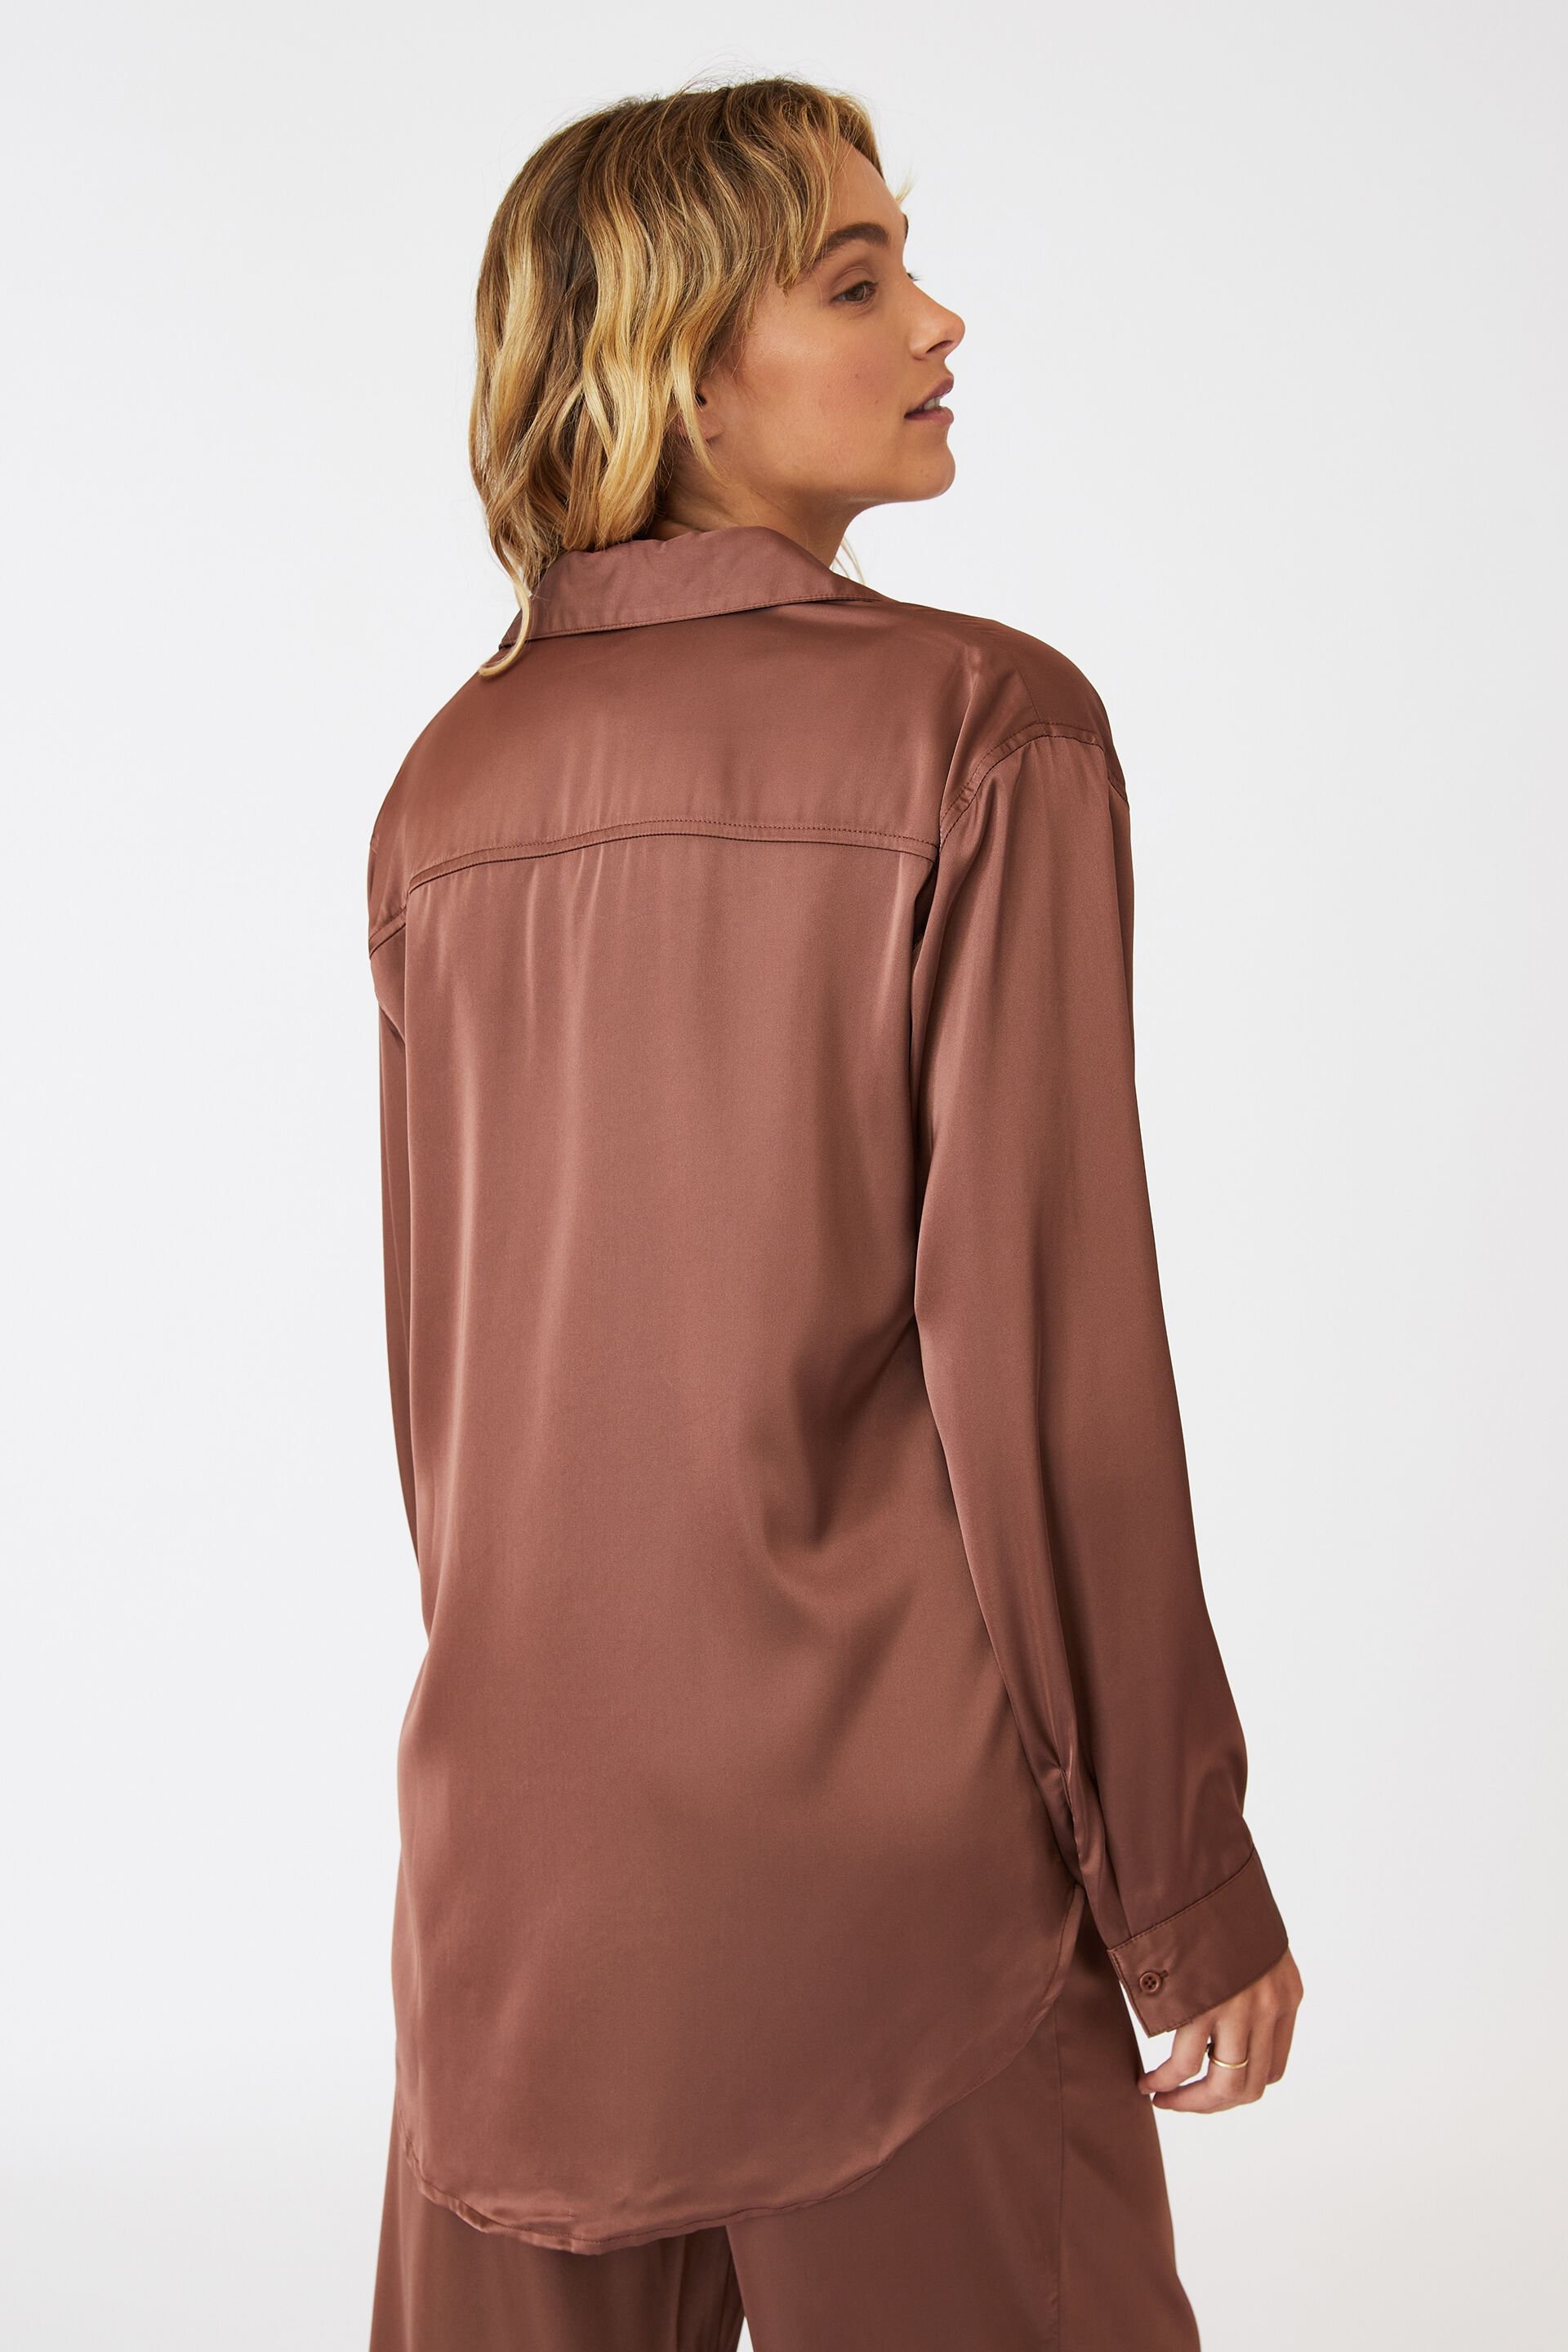 Gifts Gifts For Her | Long Sleeve Satin Sleep Shirt - PF20519